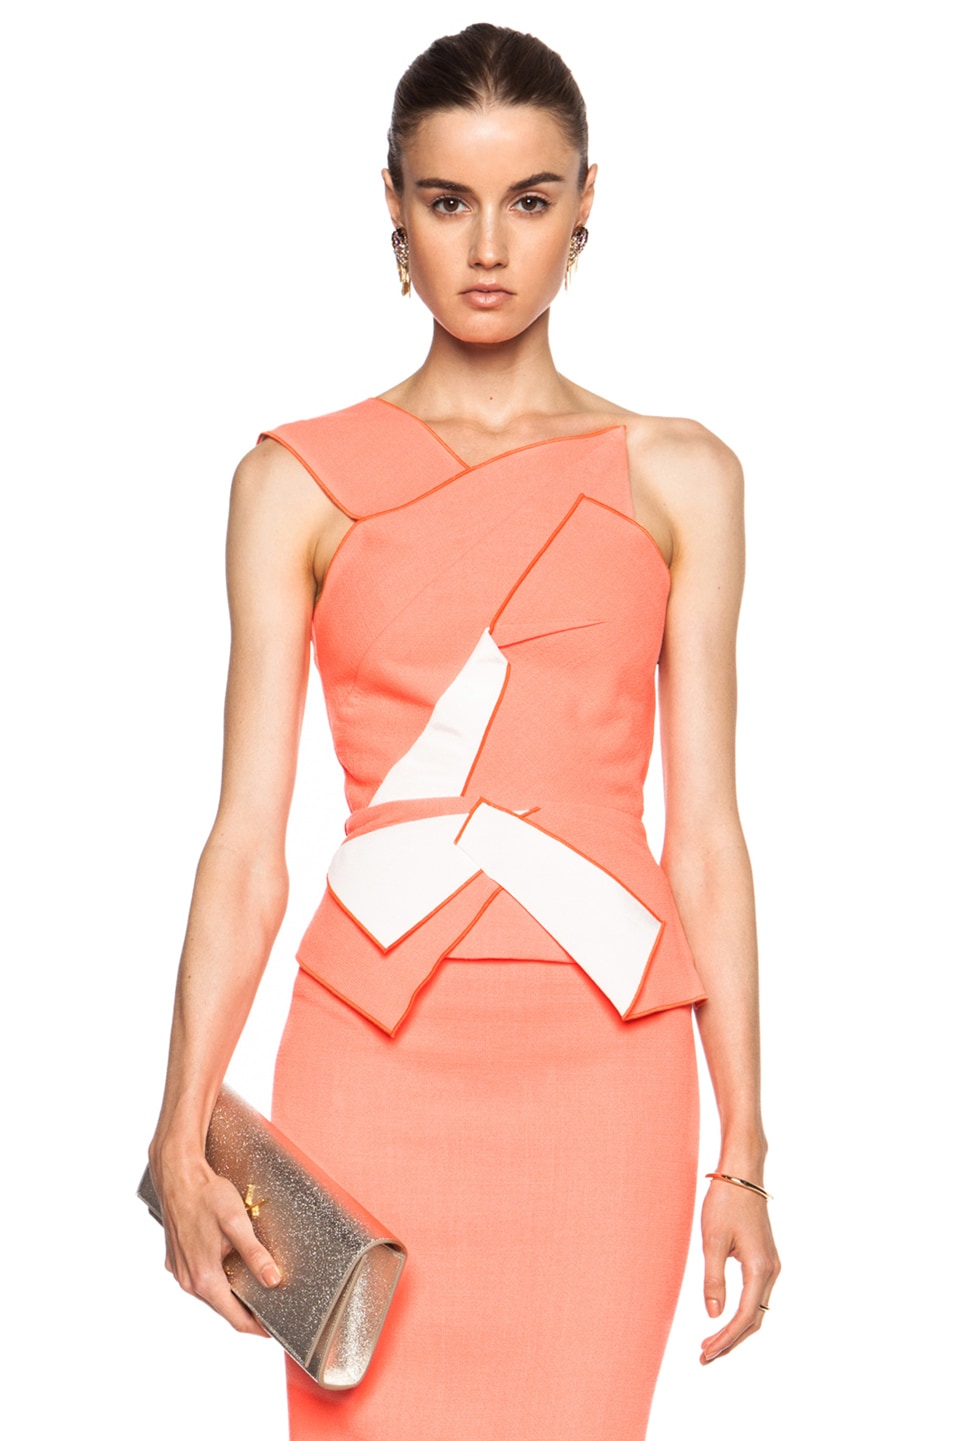 Roland Mouret Soulton Wool Top in Fluro Coral & White | FWRD